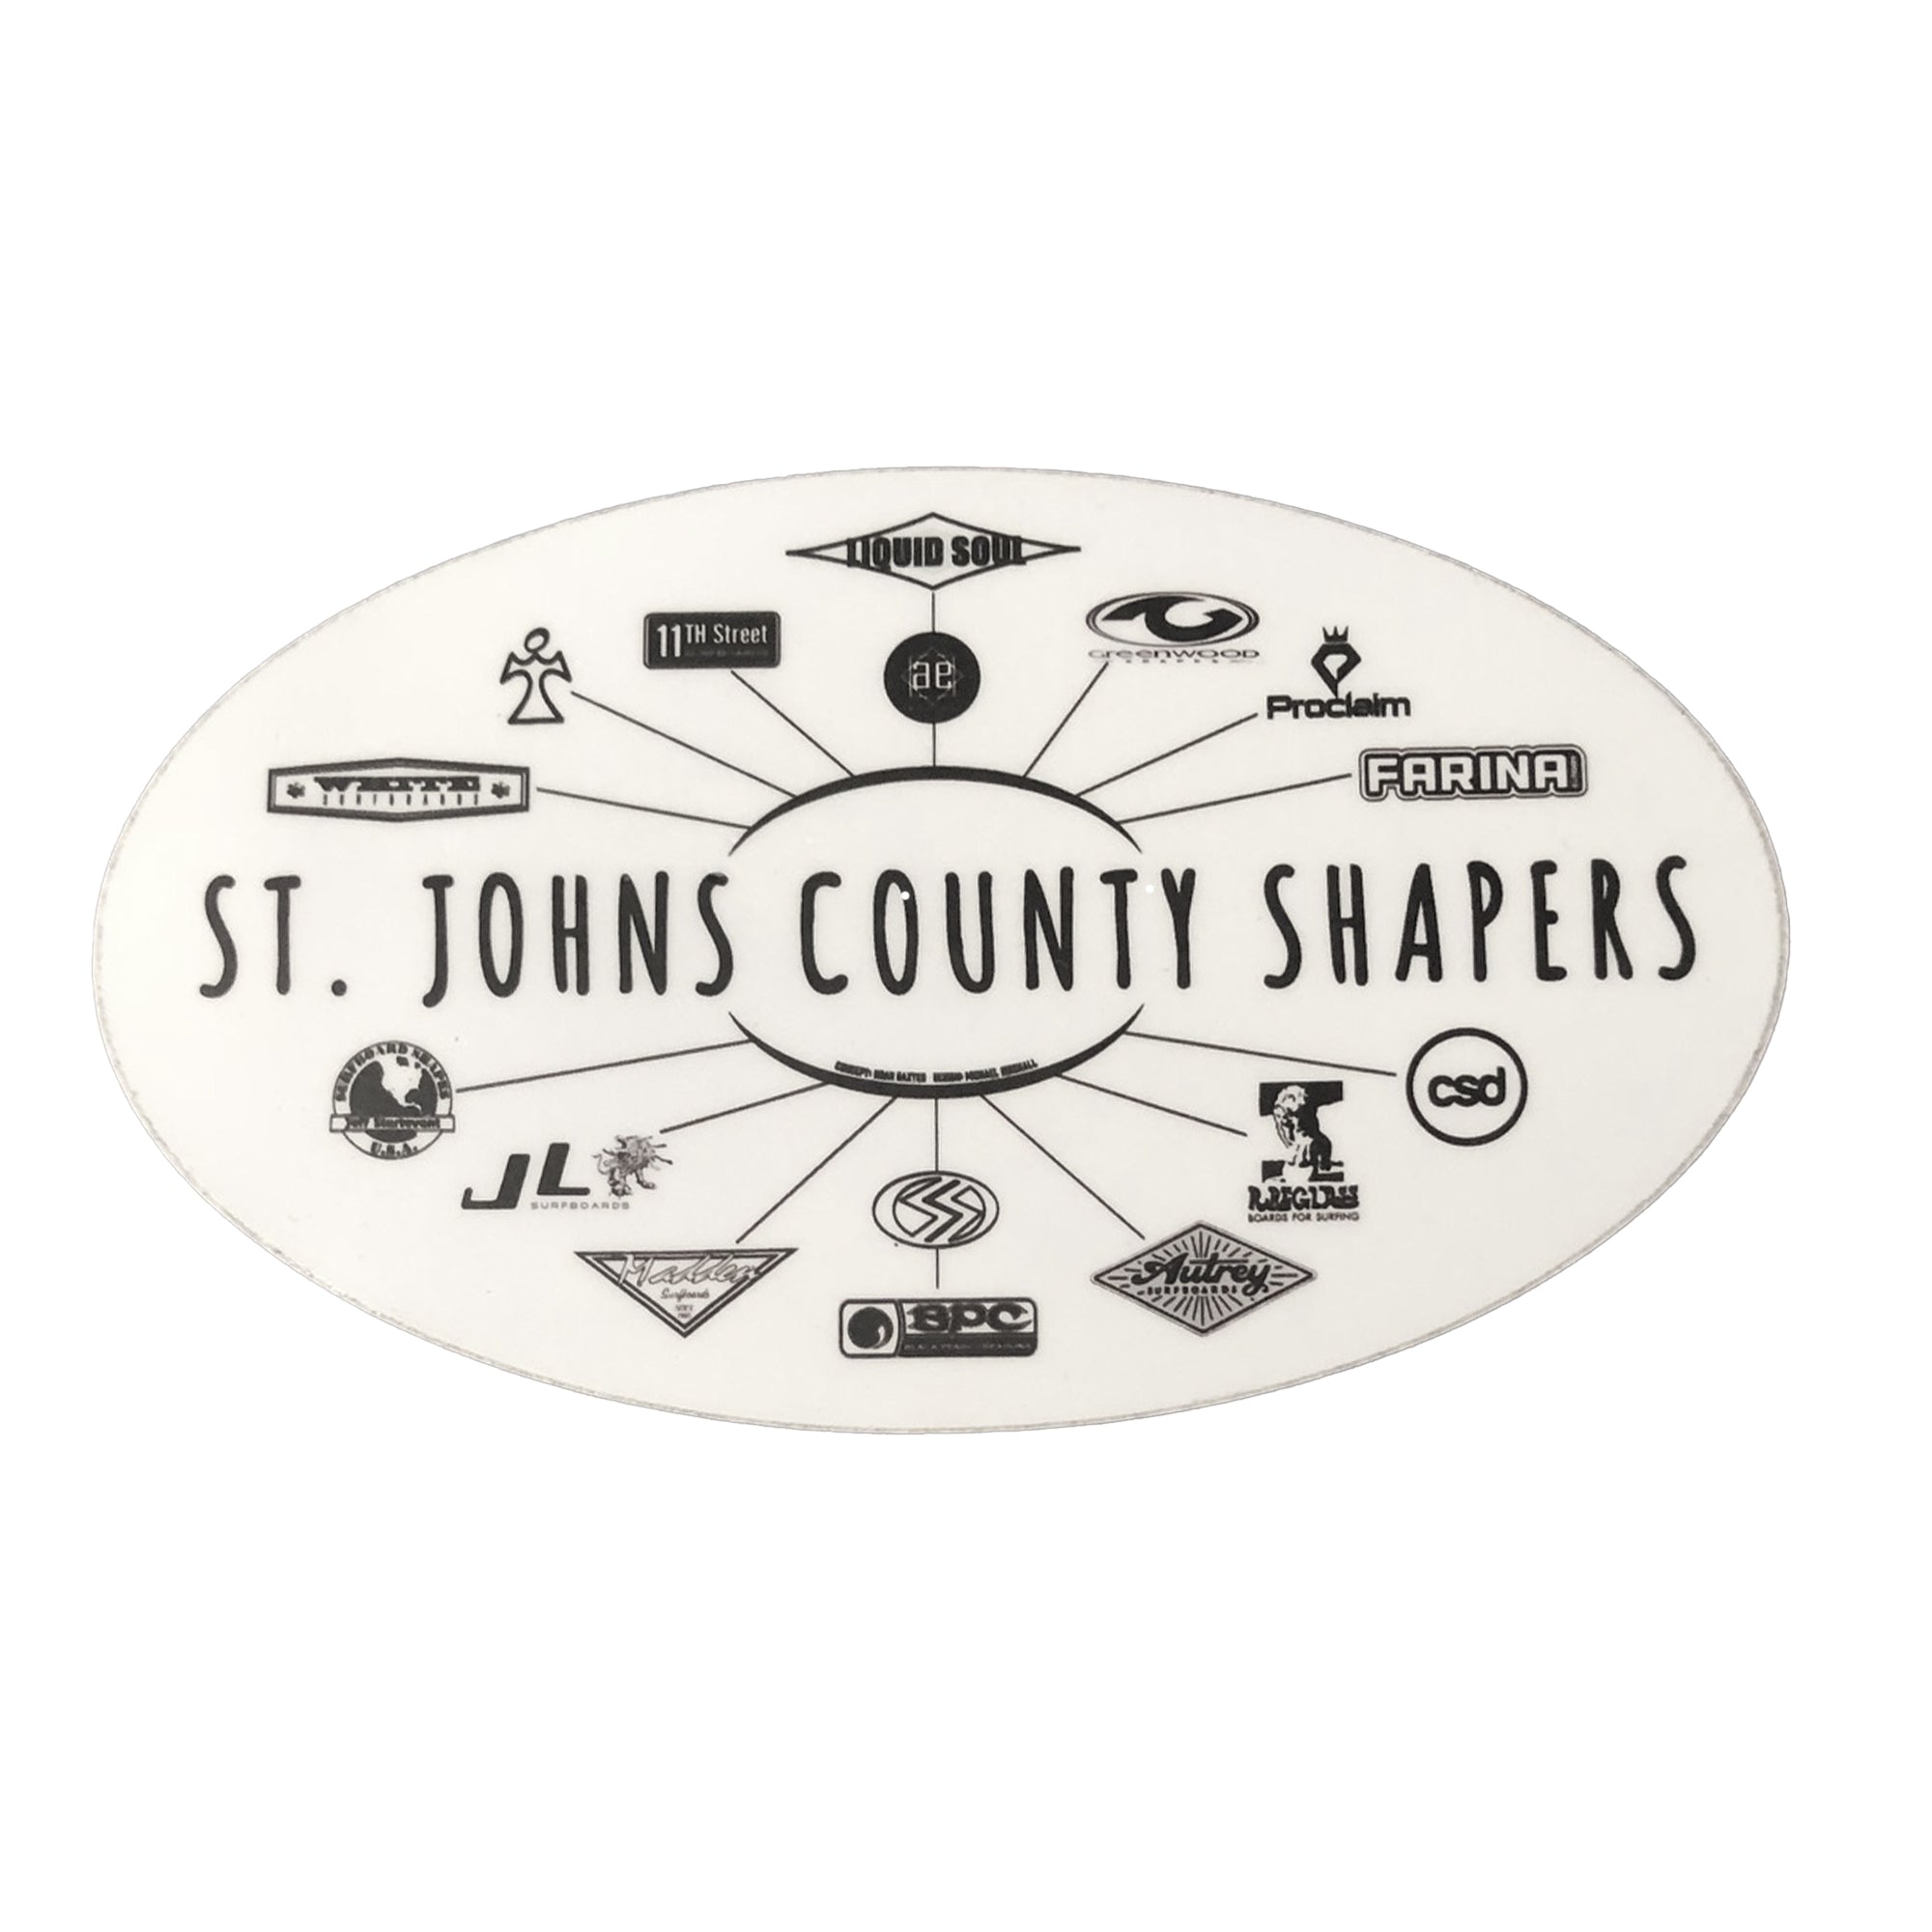 St. Johns County Shapers Sticker